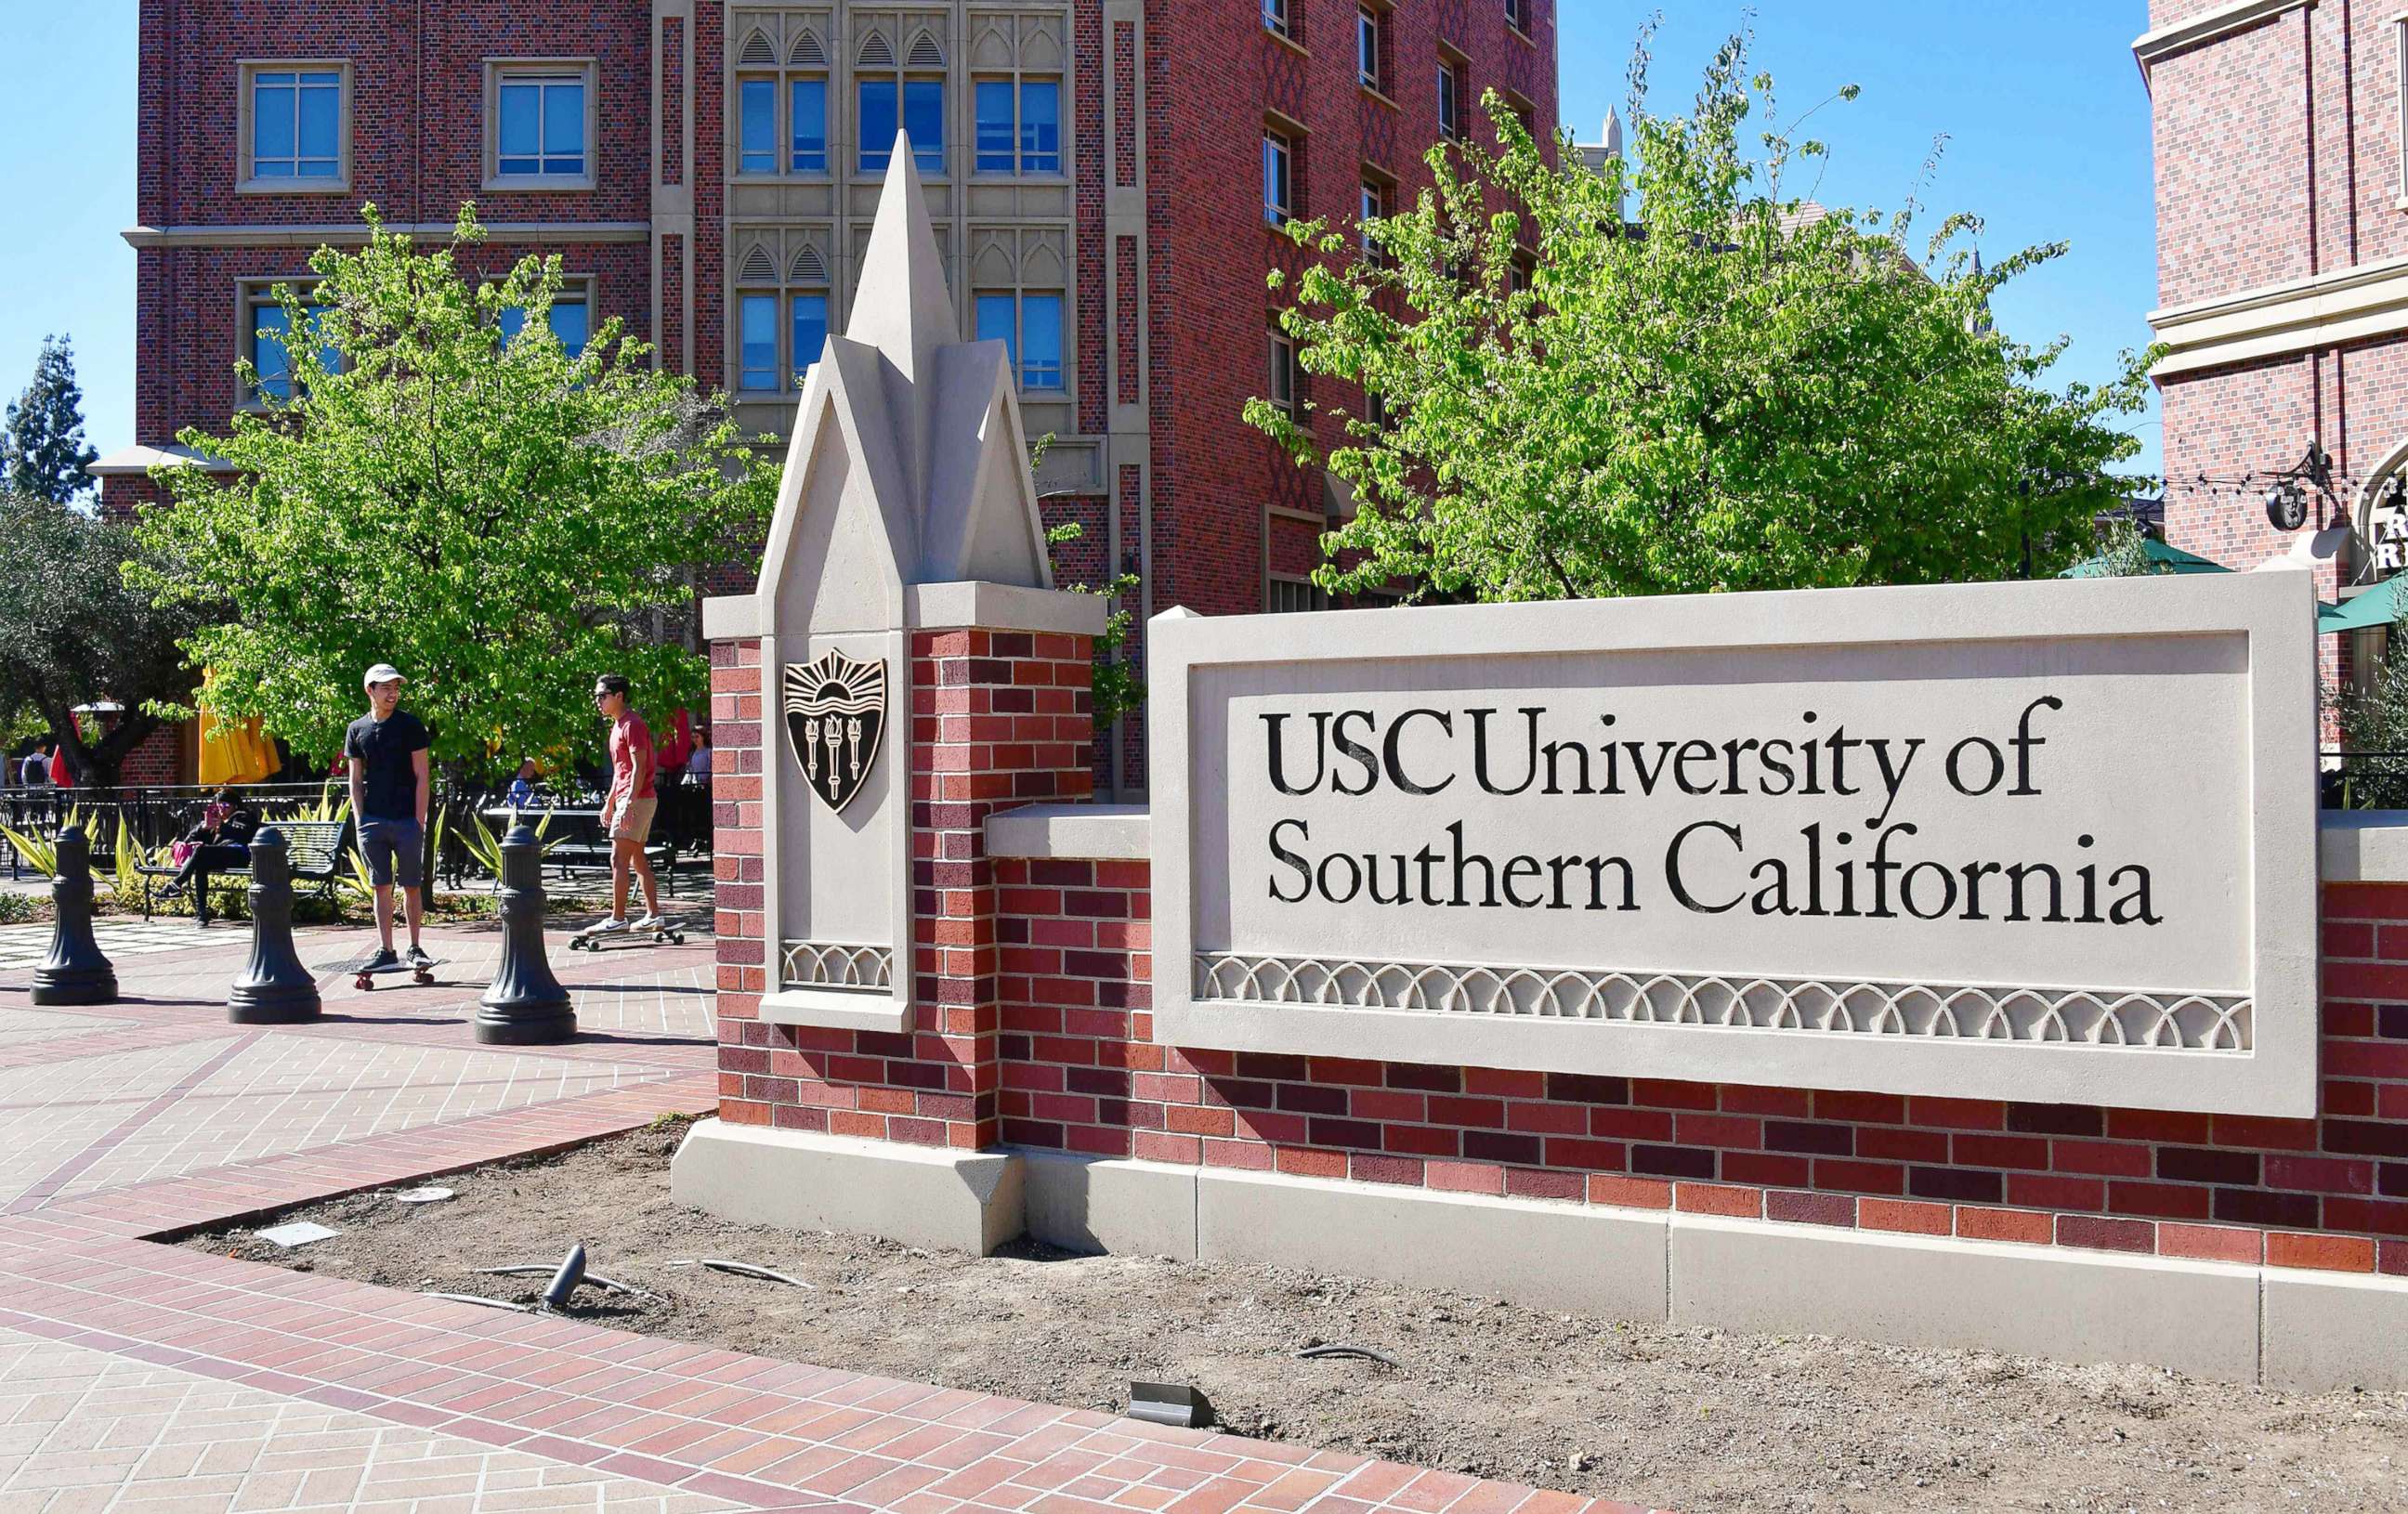 PHOTO: In this file photo taken on March 13, 2019, pictures the University of Southern California (USC) in Los Angeles.